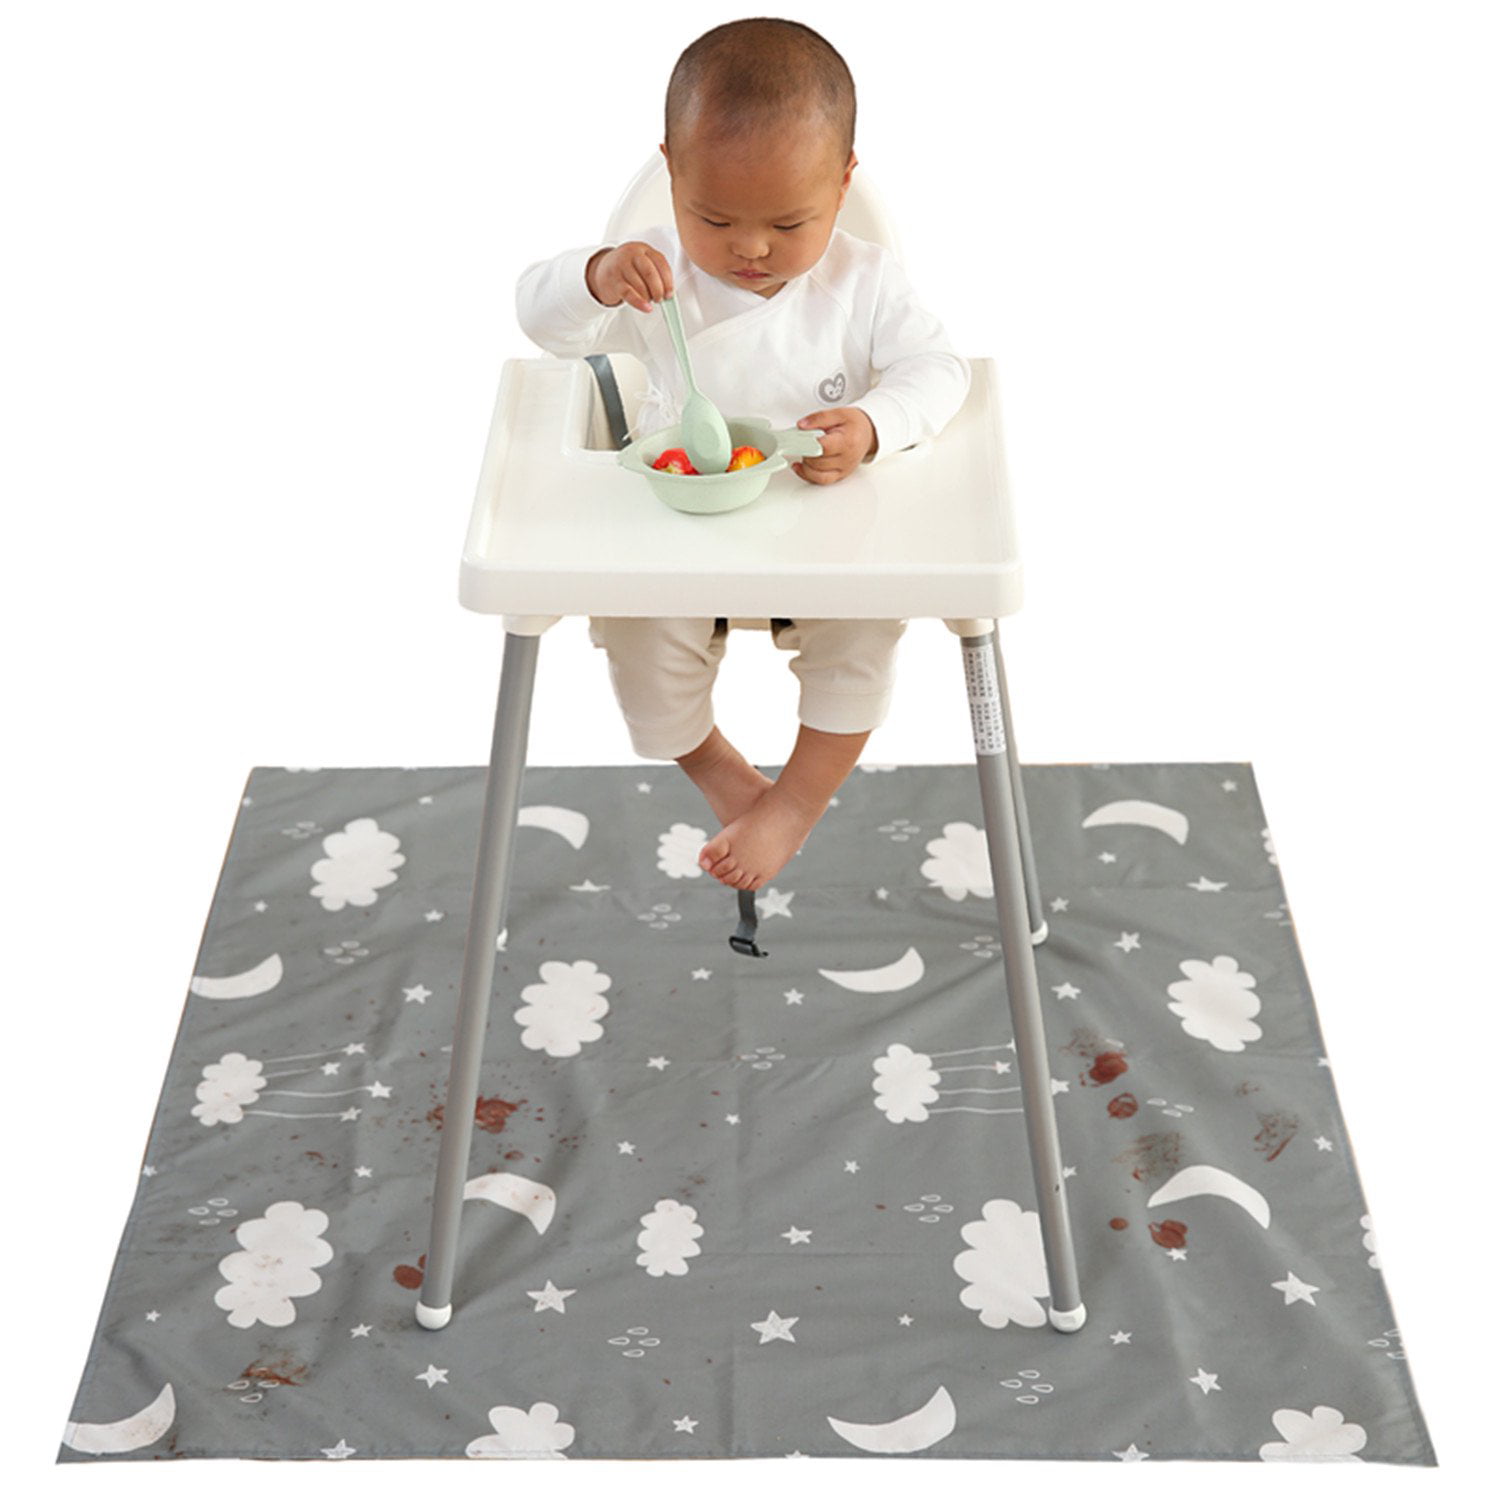 High Chair Mat Waterproof and Washable Splat Mat Black Star Protable Picnic Table Cloth Mat Non Slip Mat for Art/Crafts/Playtime 46'' x 42'' Baby Splat Mat for Under High Chair 